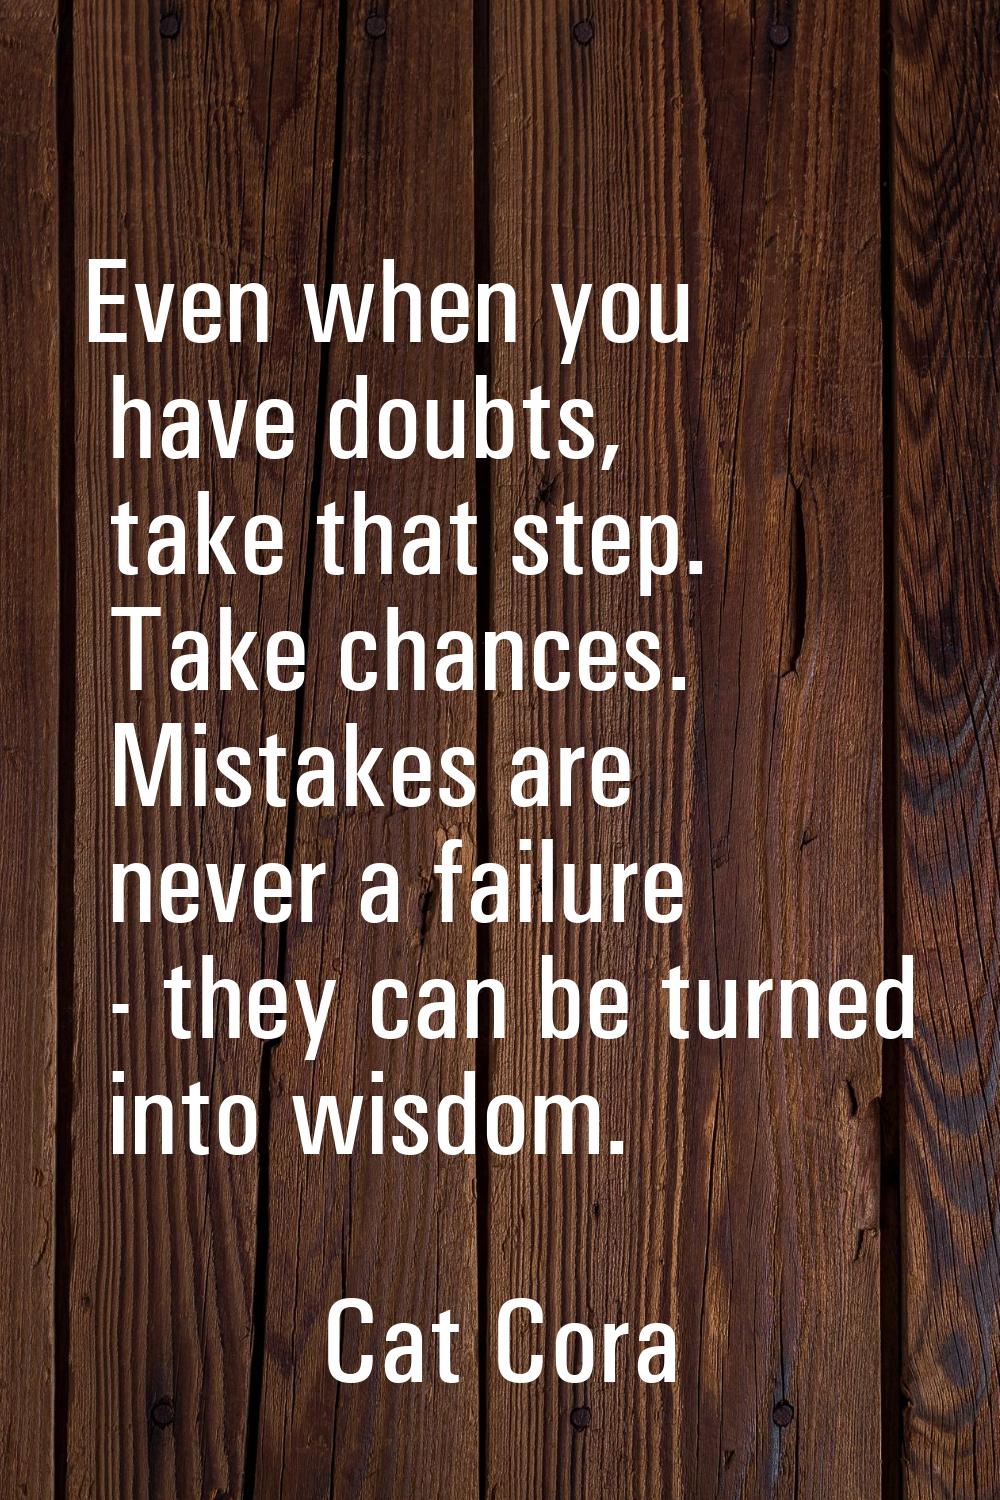 Even when you have doubts, take that step. Take chances. Mistakes are never a failure - they can be